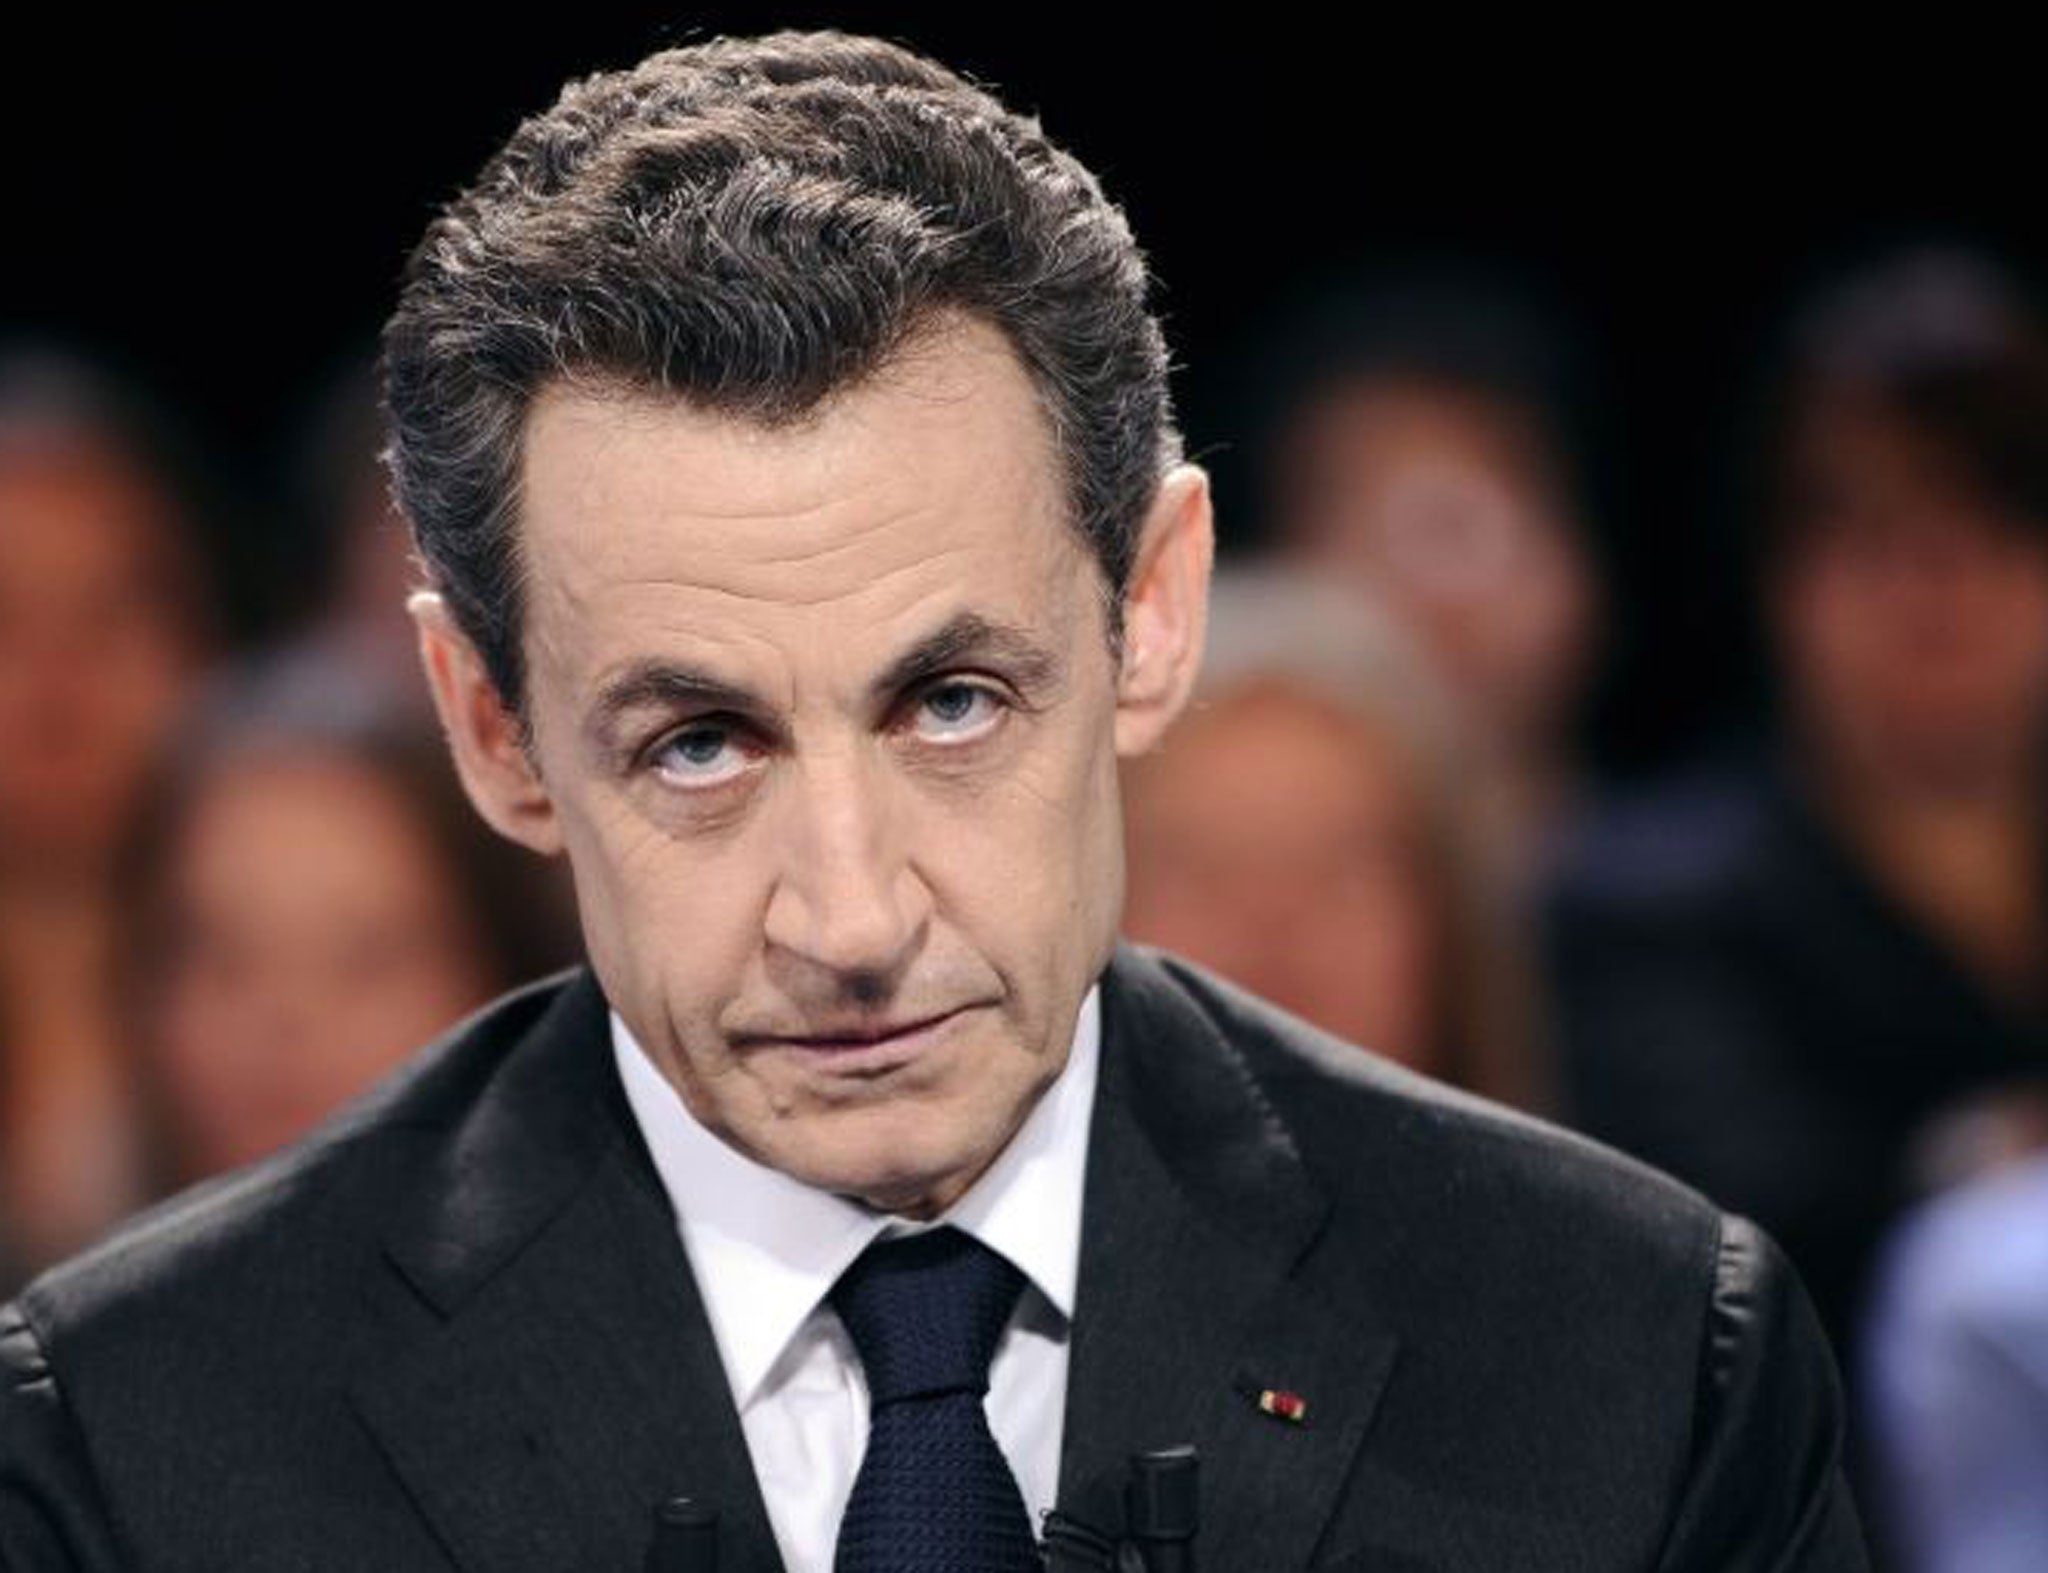 Former president Nicolas Sarkozy should be cleared of abusing the mental weakness of France’s wealthiest woman, according to a state prosecutor